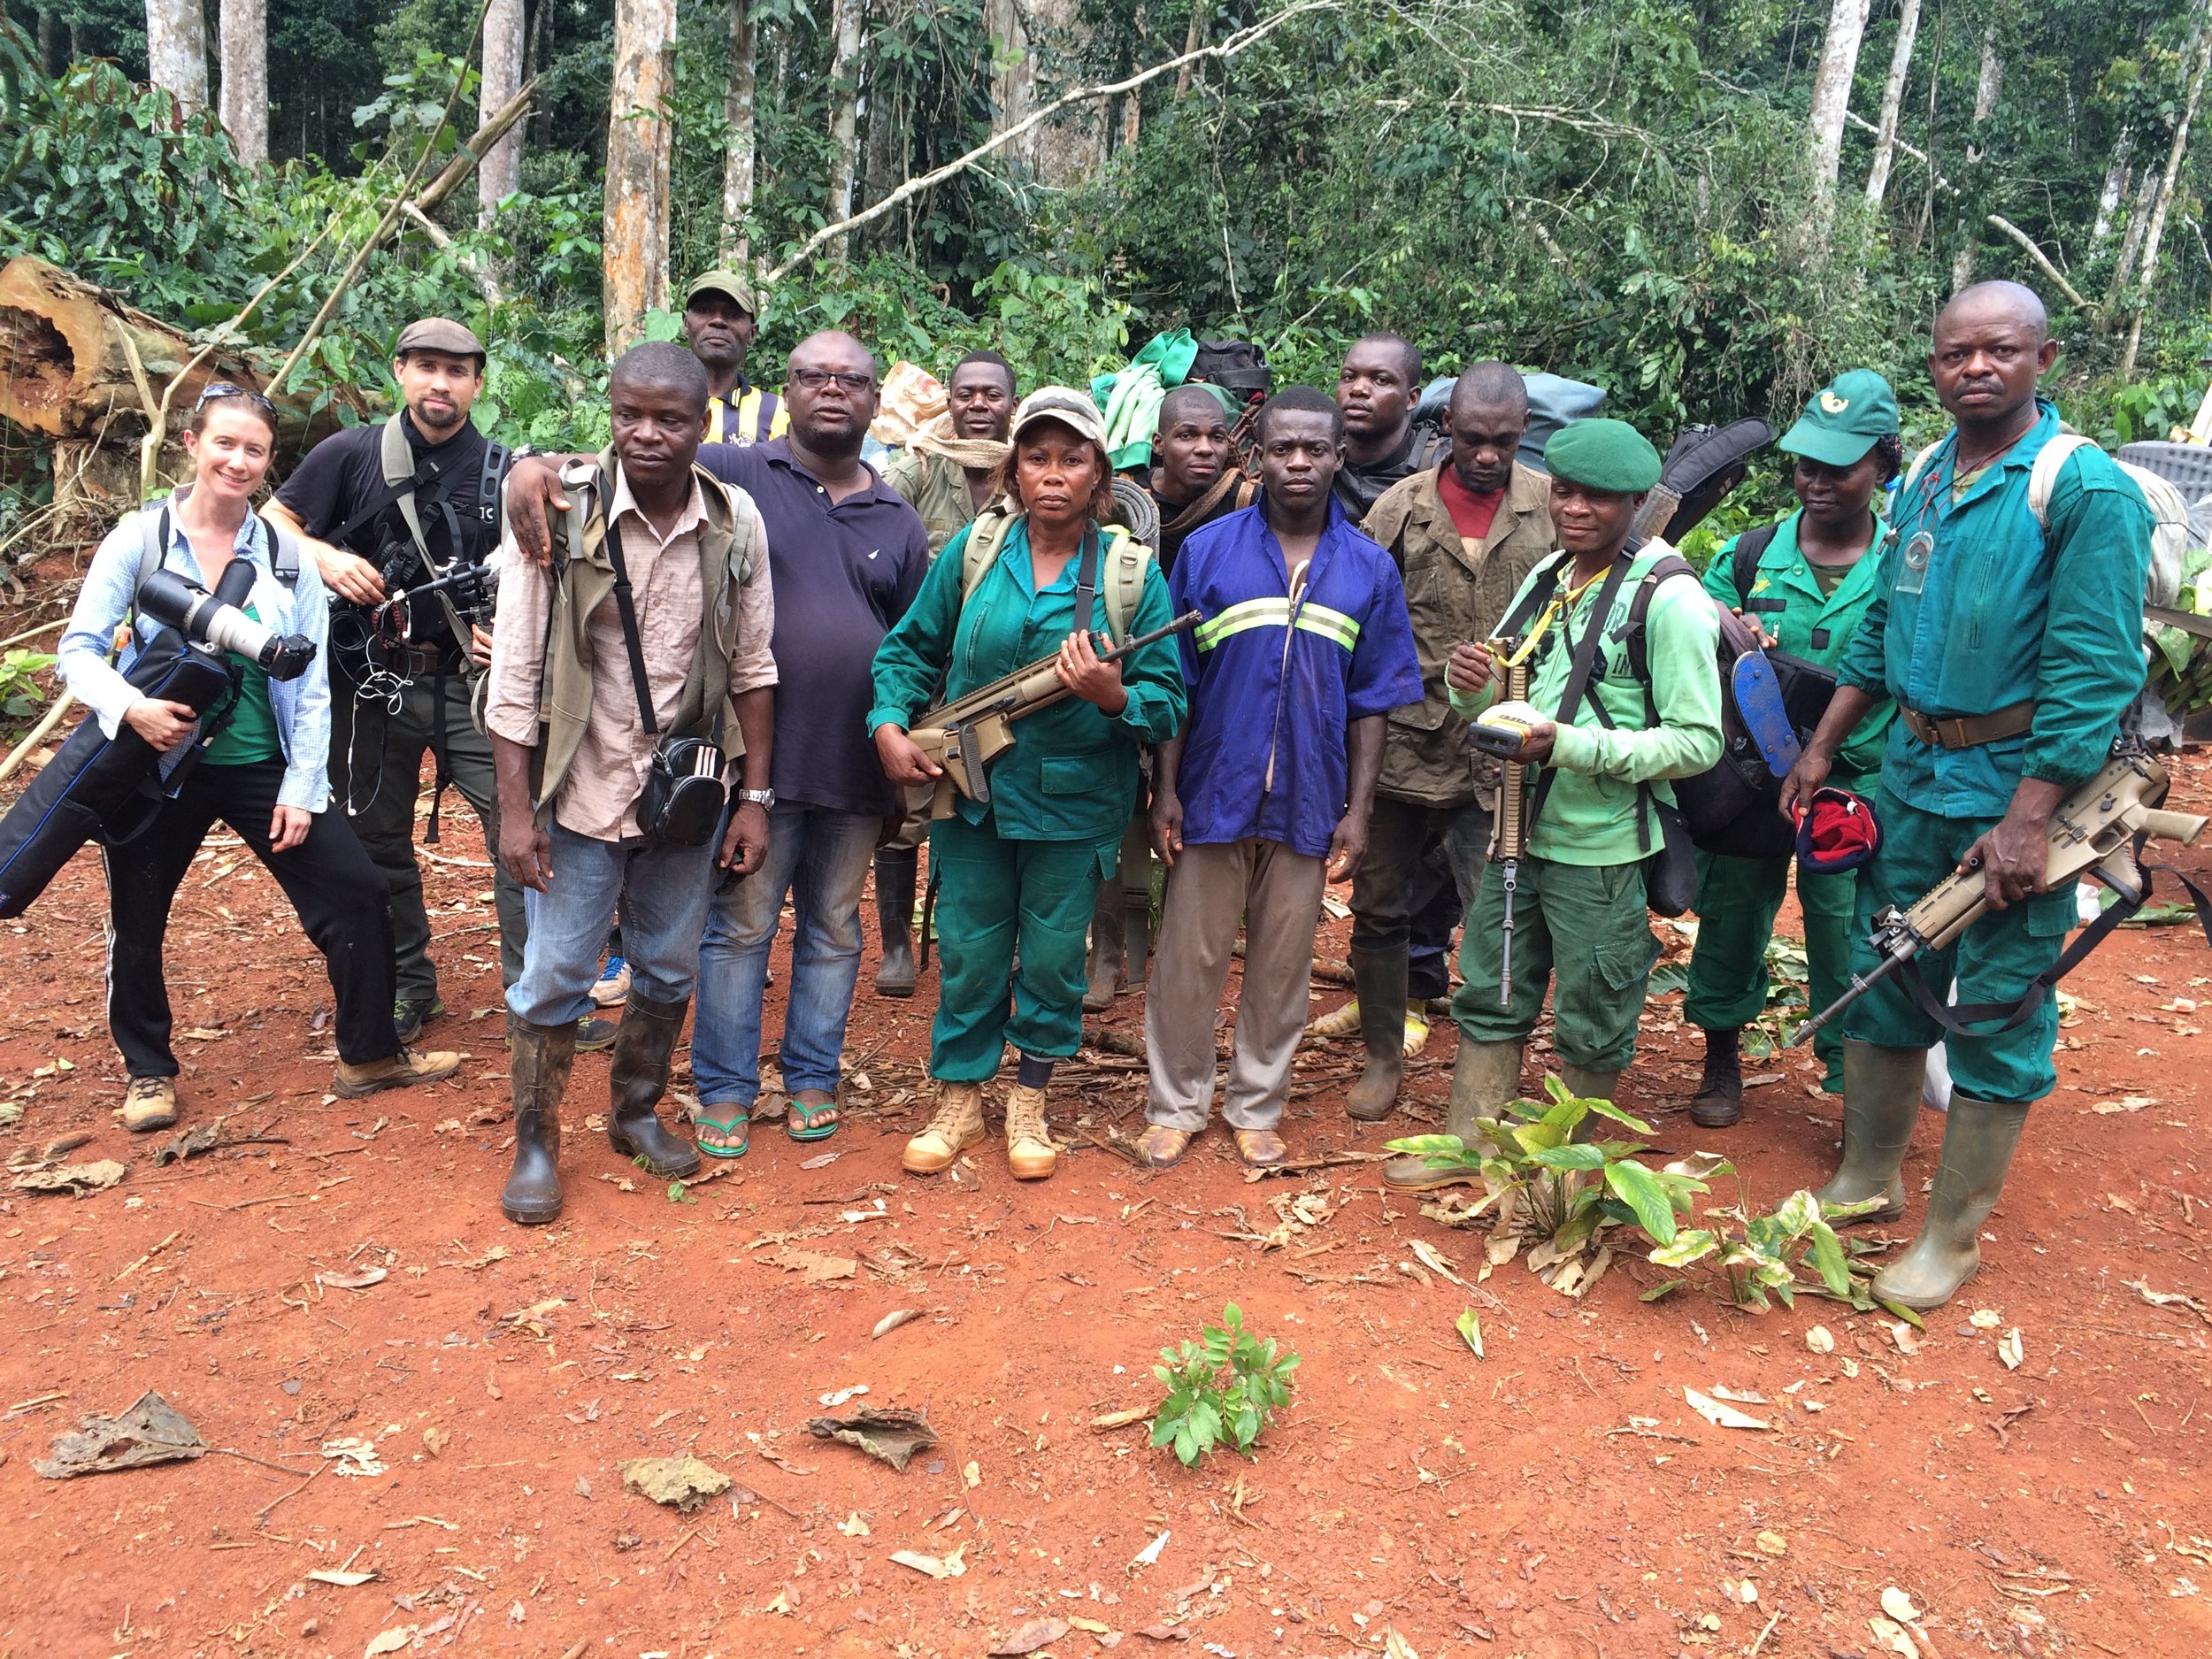  Zeb, Mariah, and Eco Guards in Cameroon during the  Silent Forests  shoot. Photo courtesy of Mariah Wilson.  